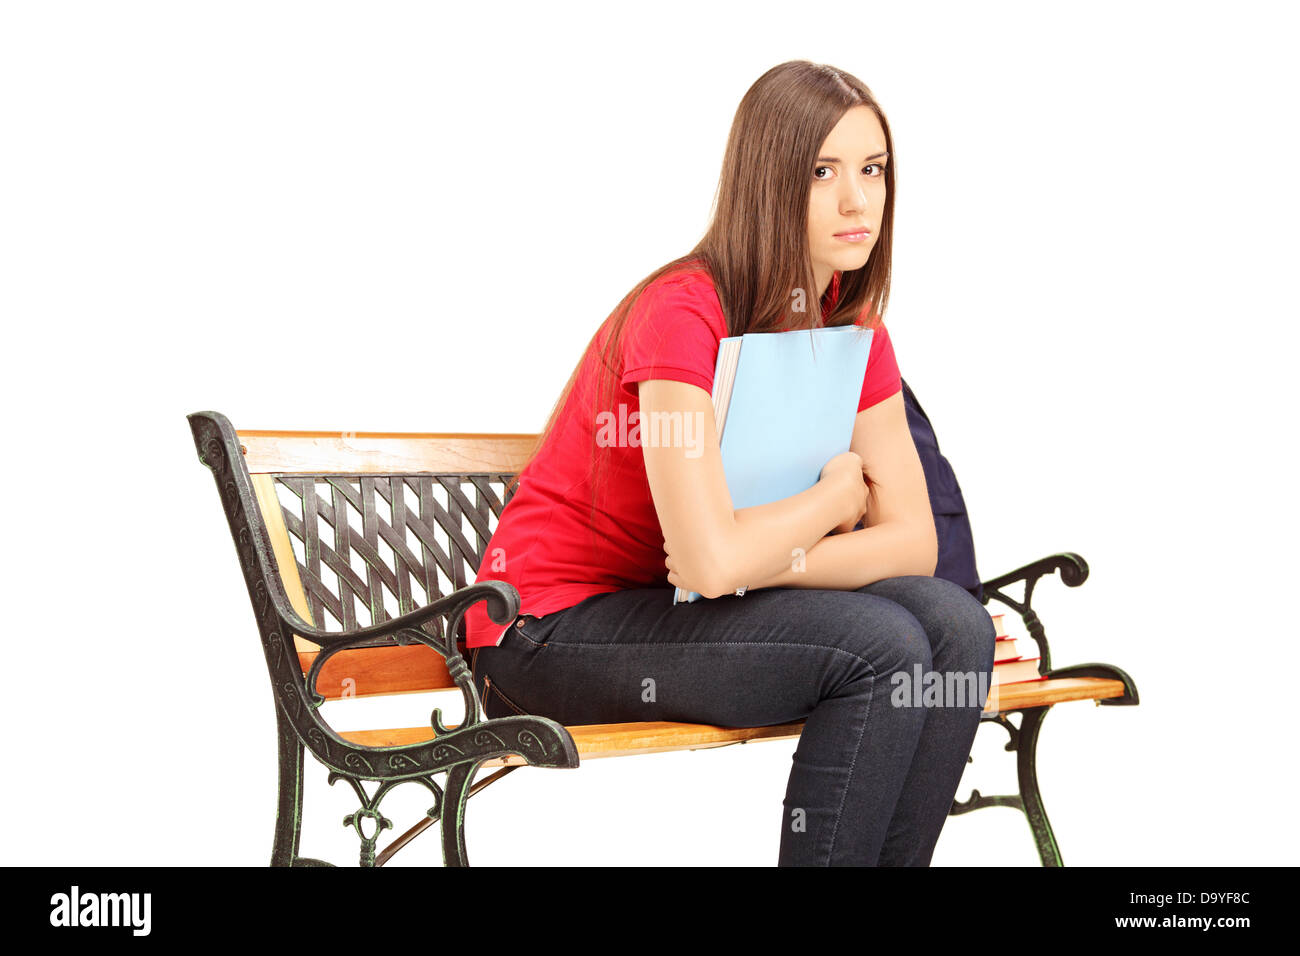 Unhappy female student sitting on a wooden bench with notebook Stock Photo